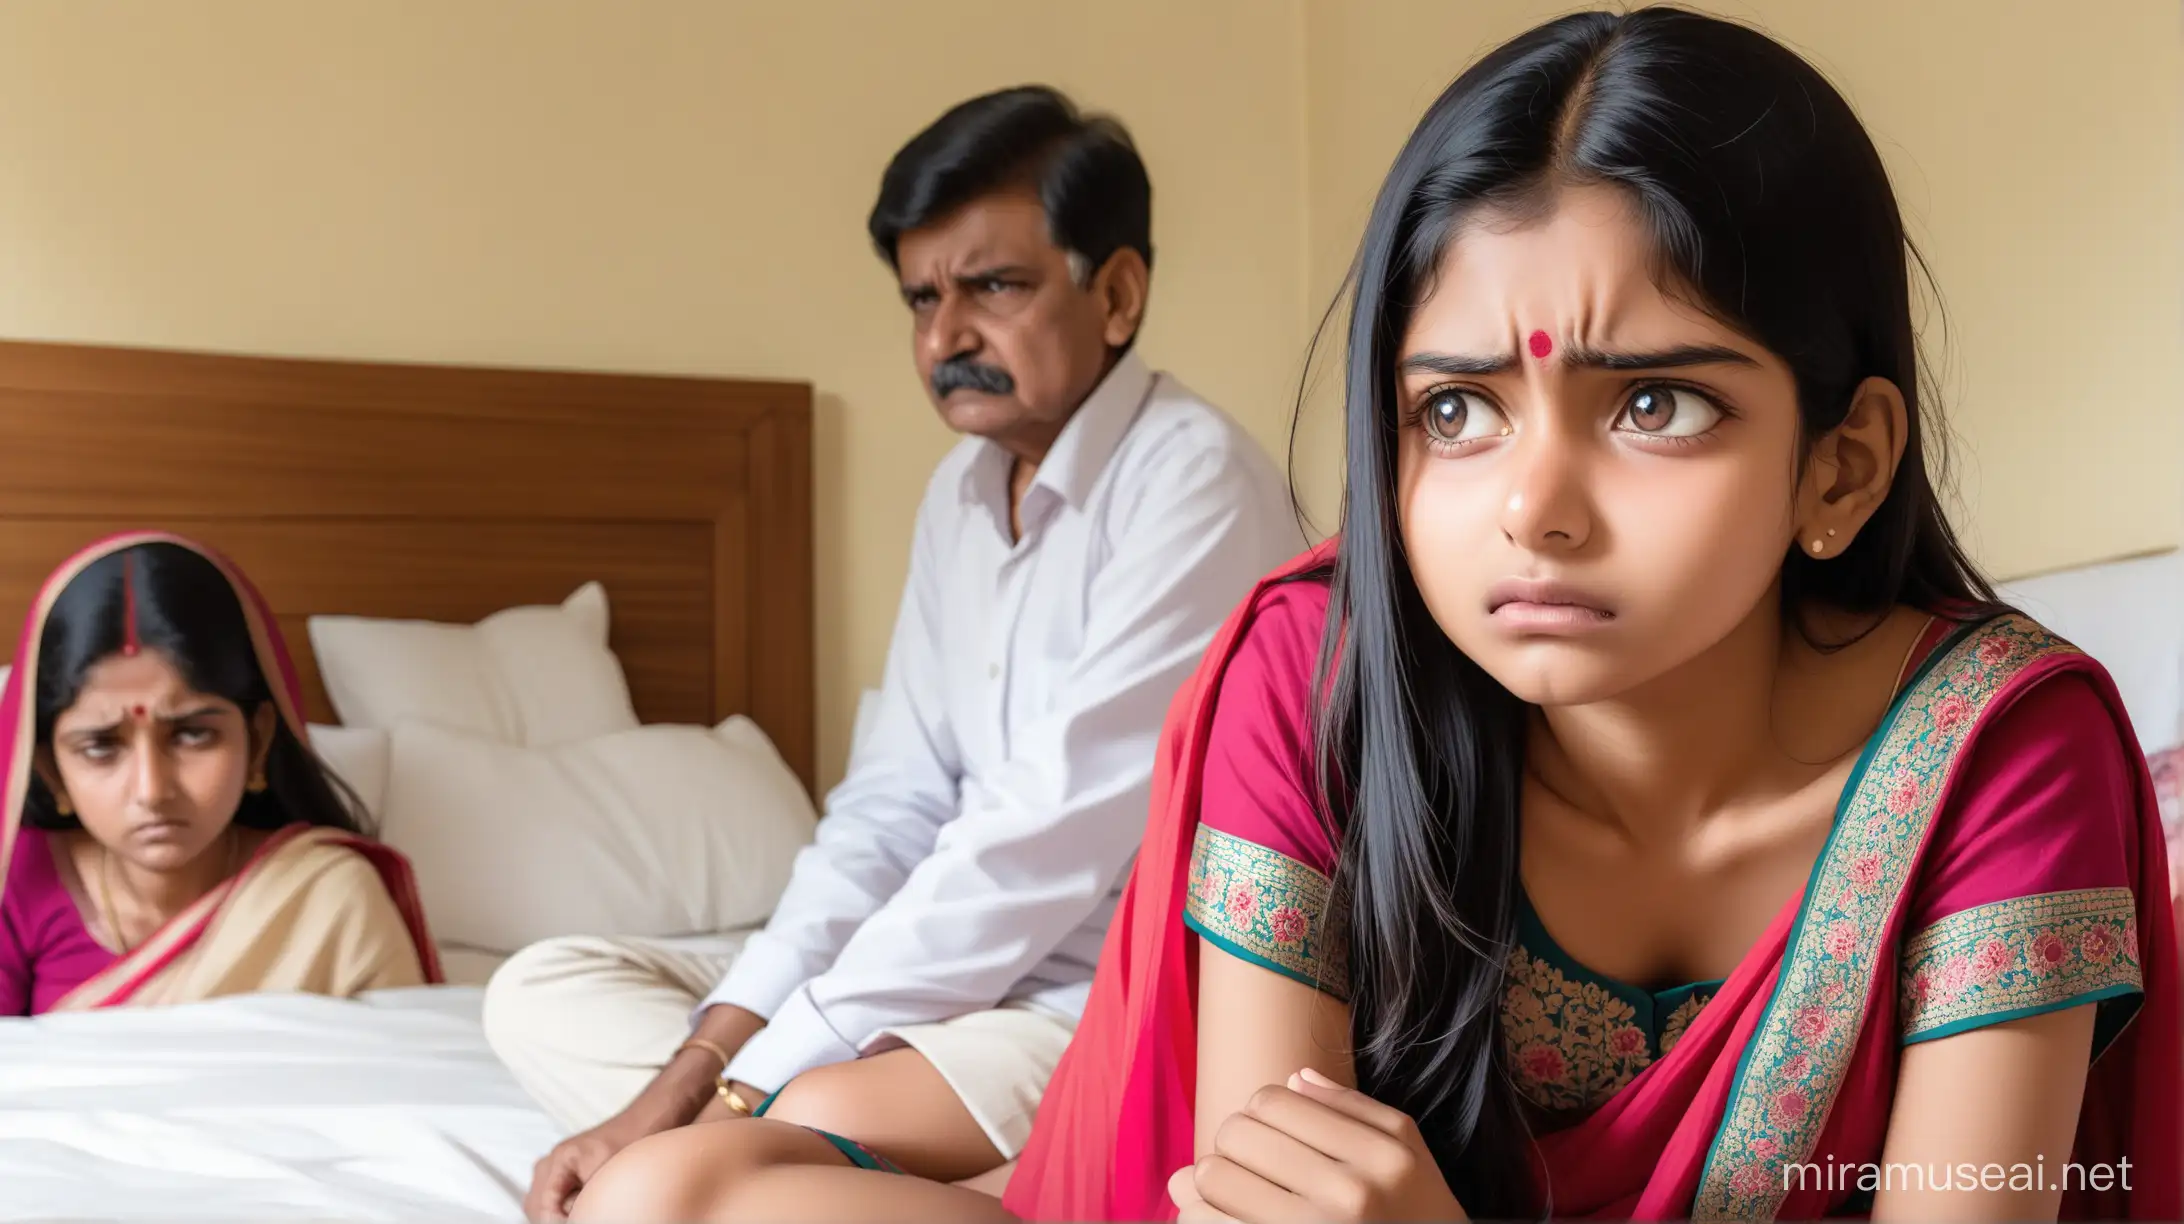 16 year old Indian girl sitting on bed, upset, with parents